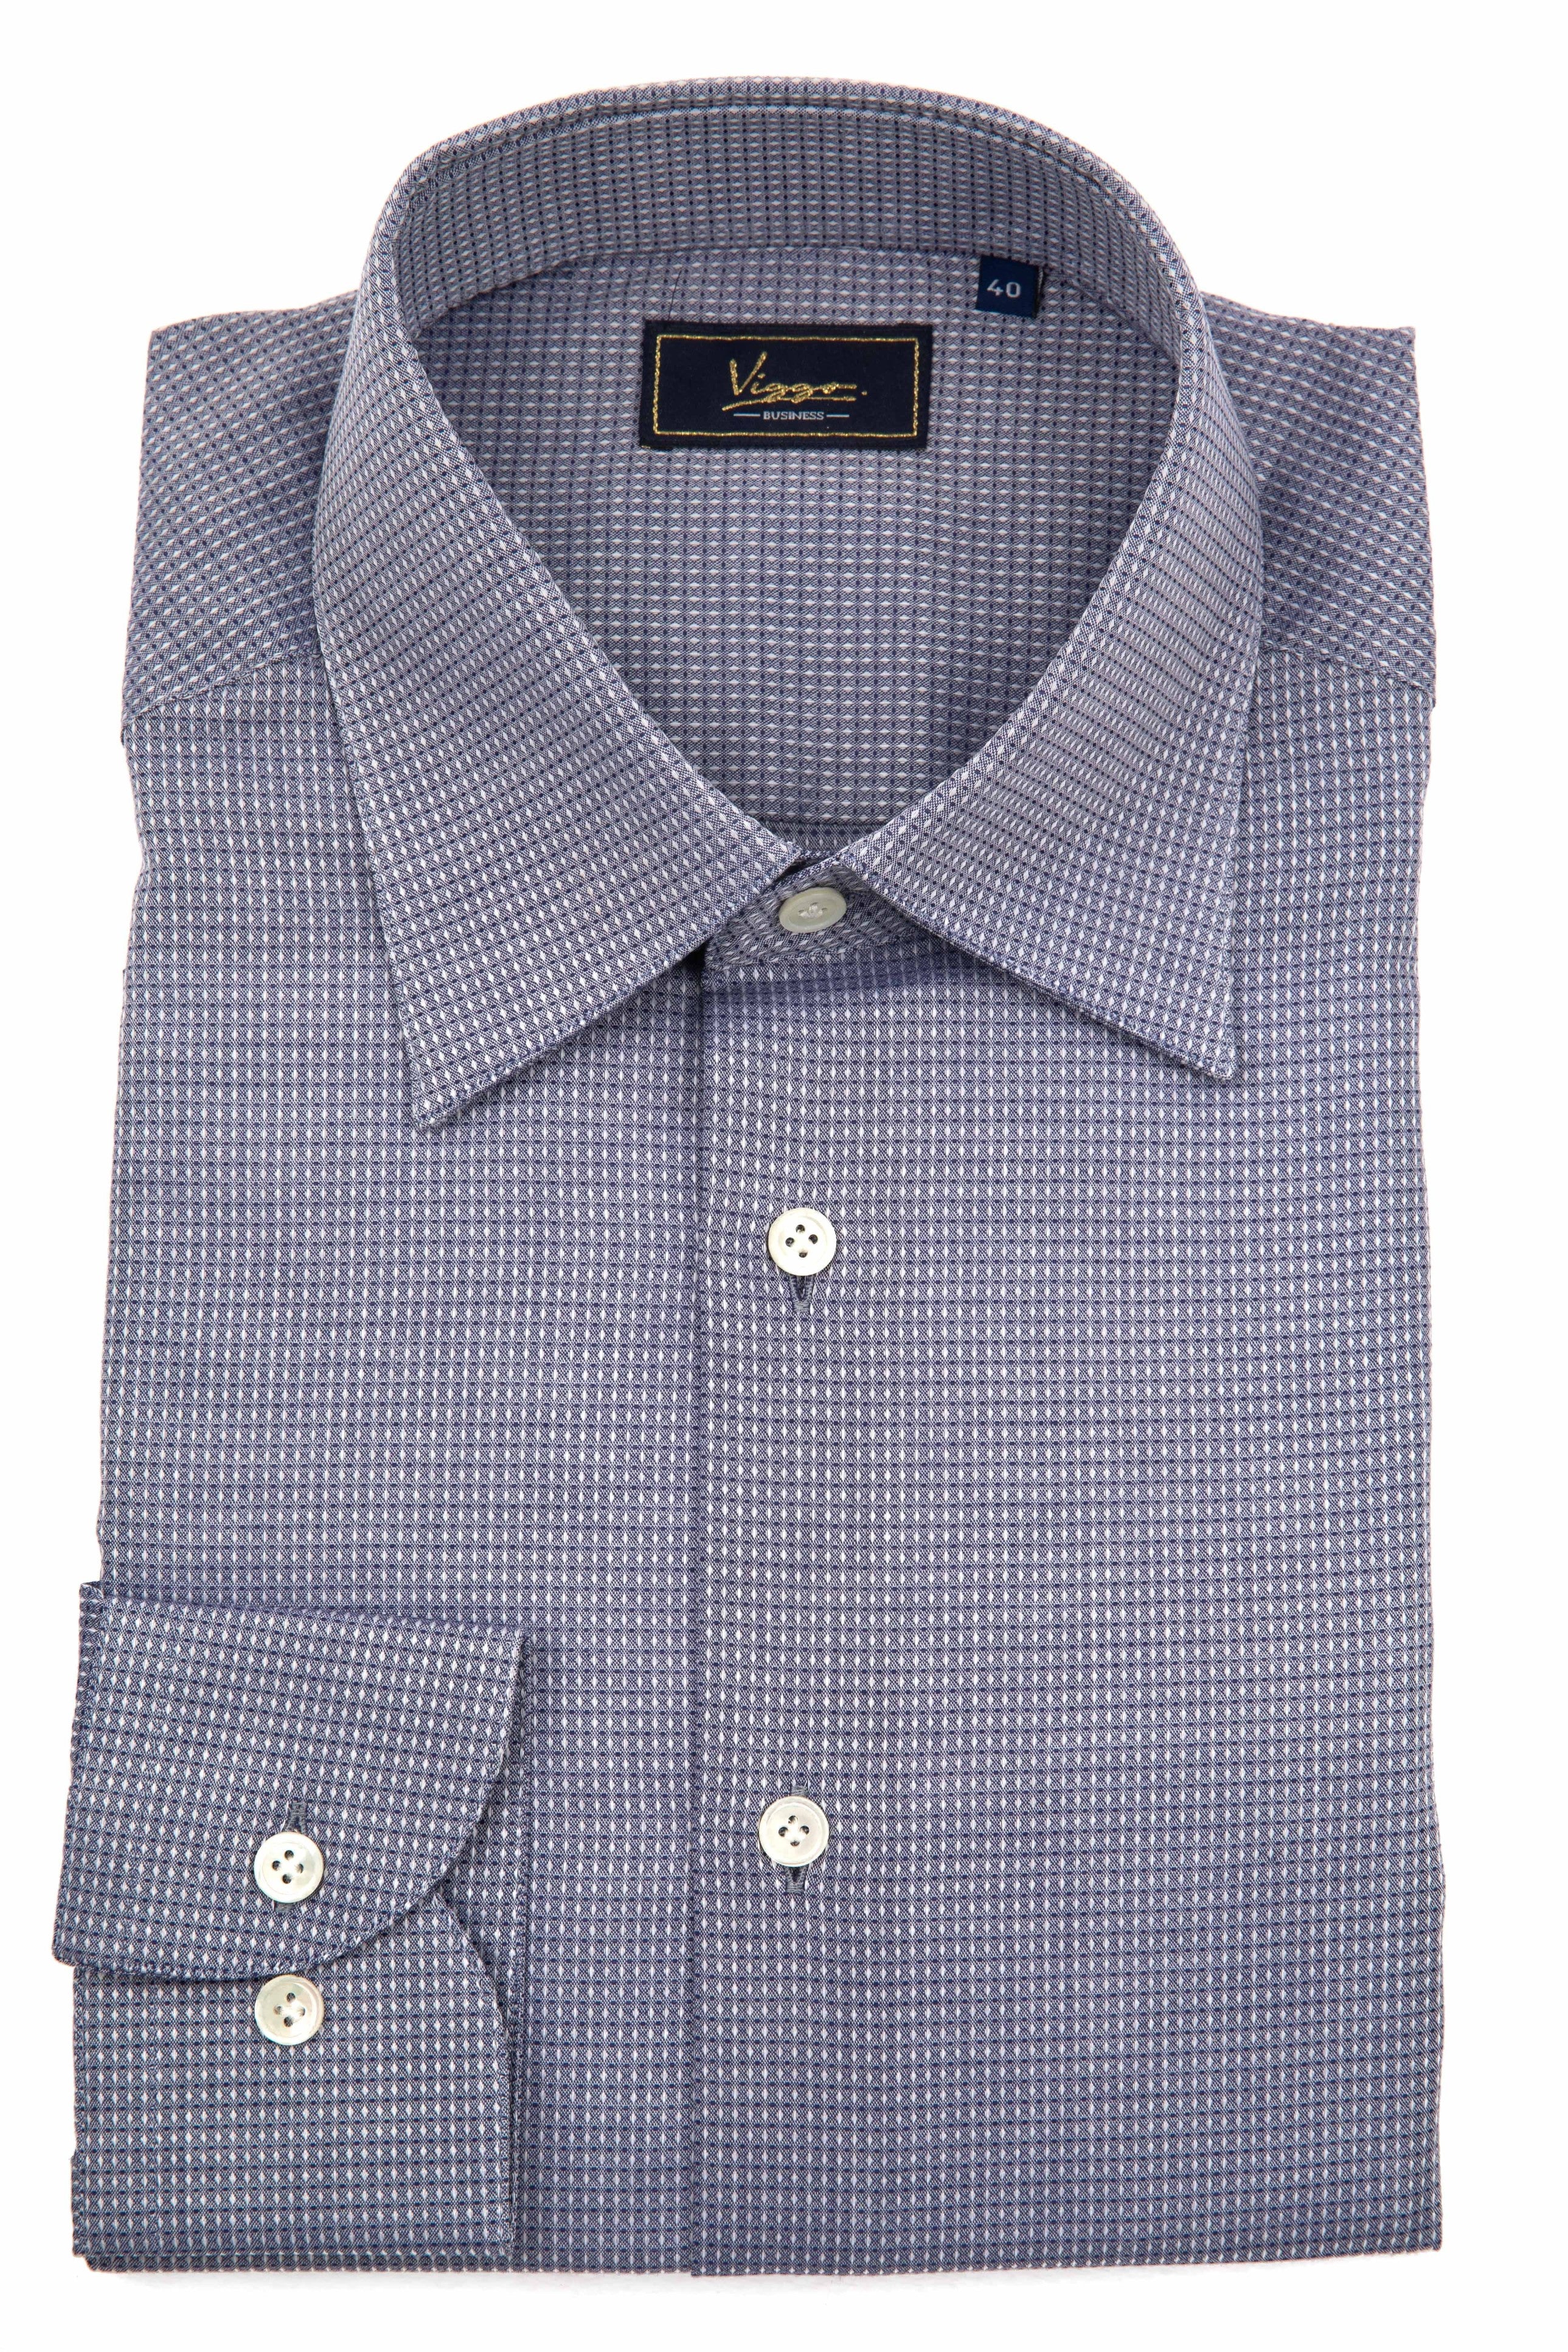 Gray Business Shirt With White And Navy Blue